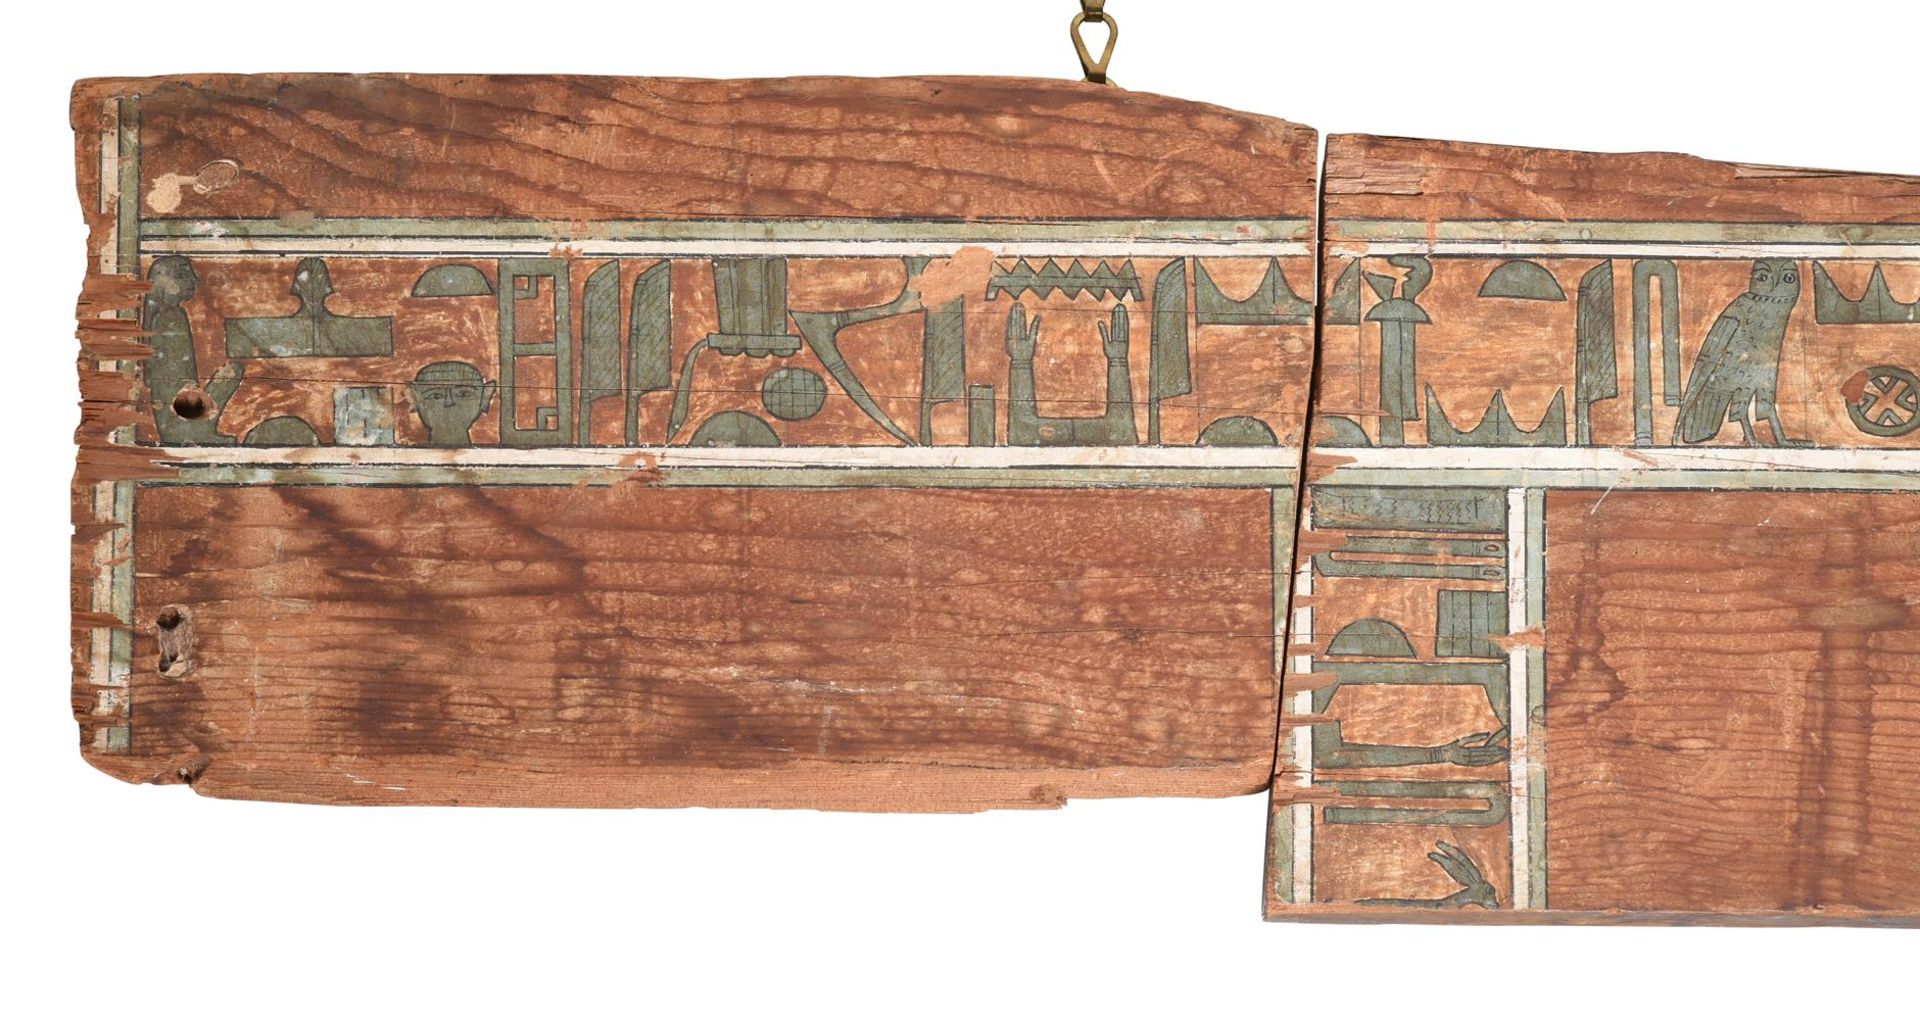 AN EGYPTIAN POLYCHROME PAINTED WOOD SARCOPHAGUS PANEL BELONGING TO A WOMAN MIDDLE KINGDOM - Bild 2 aus 4